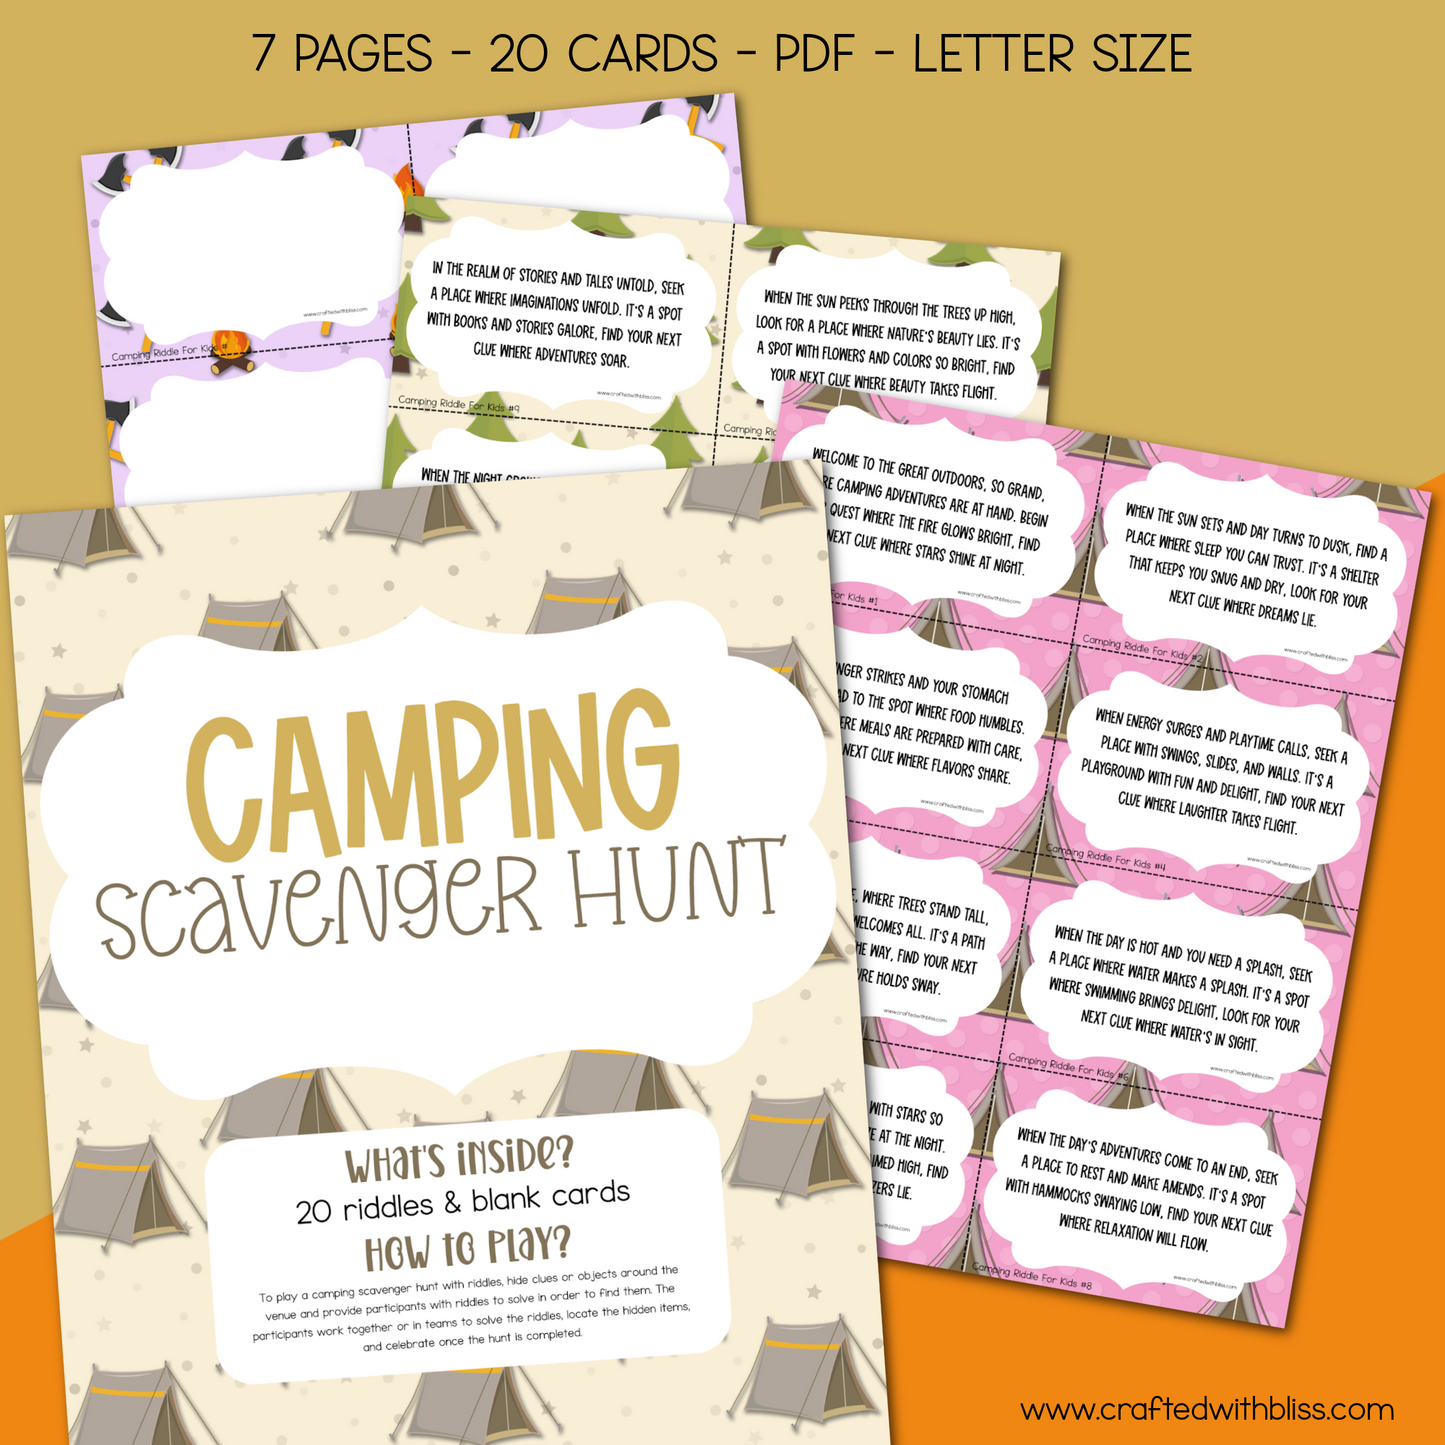 The Ultimate Camping Scavenger Hunt Riddle Clues For Kids | Camping Treasure Hunt Activity